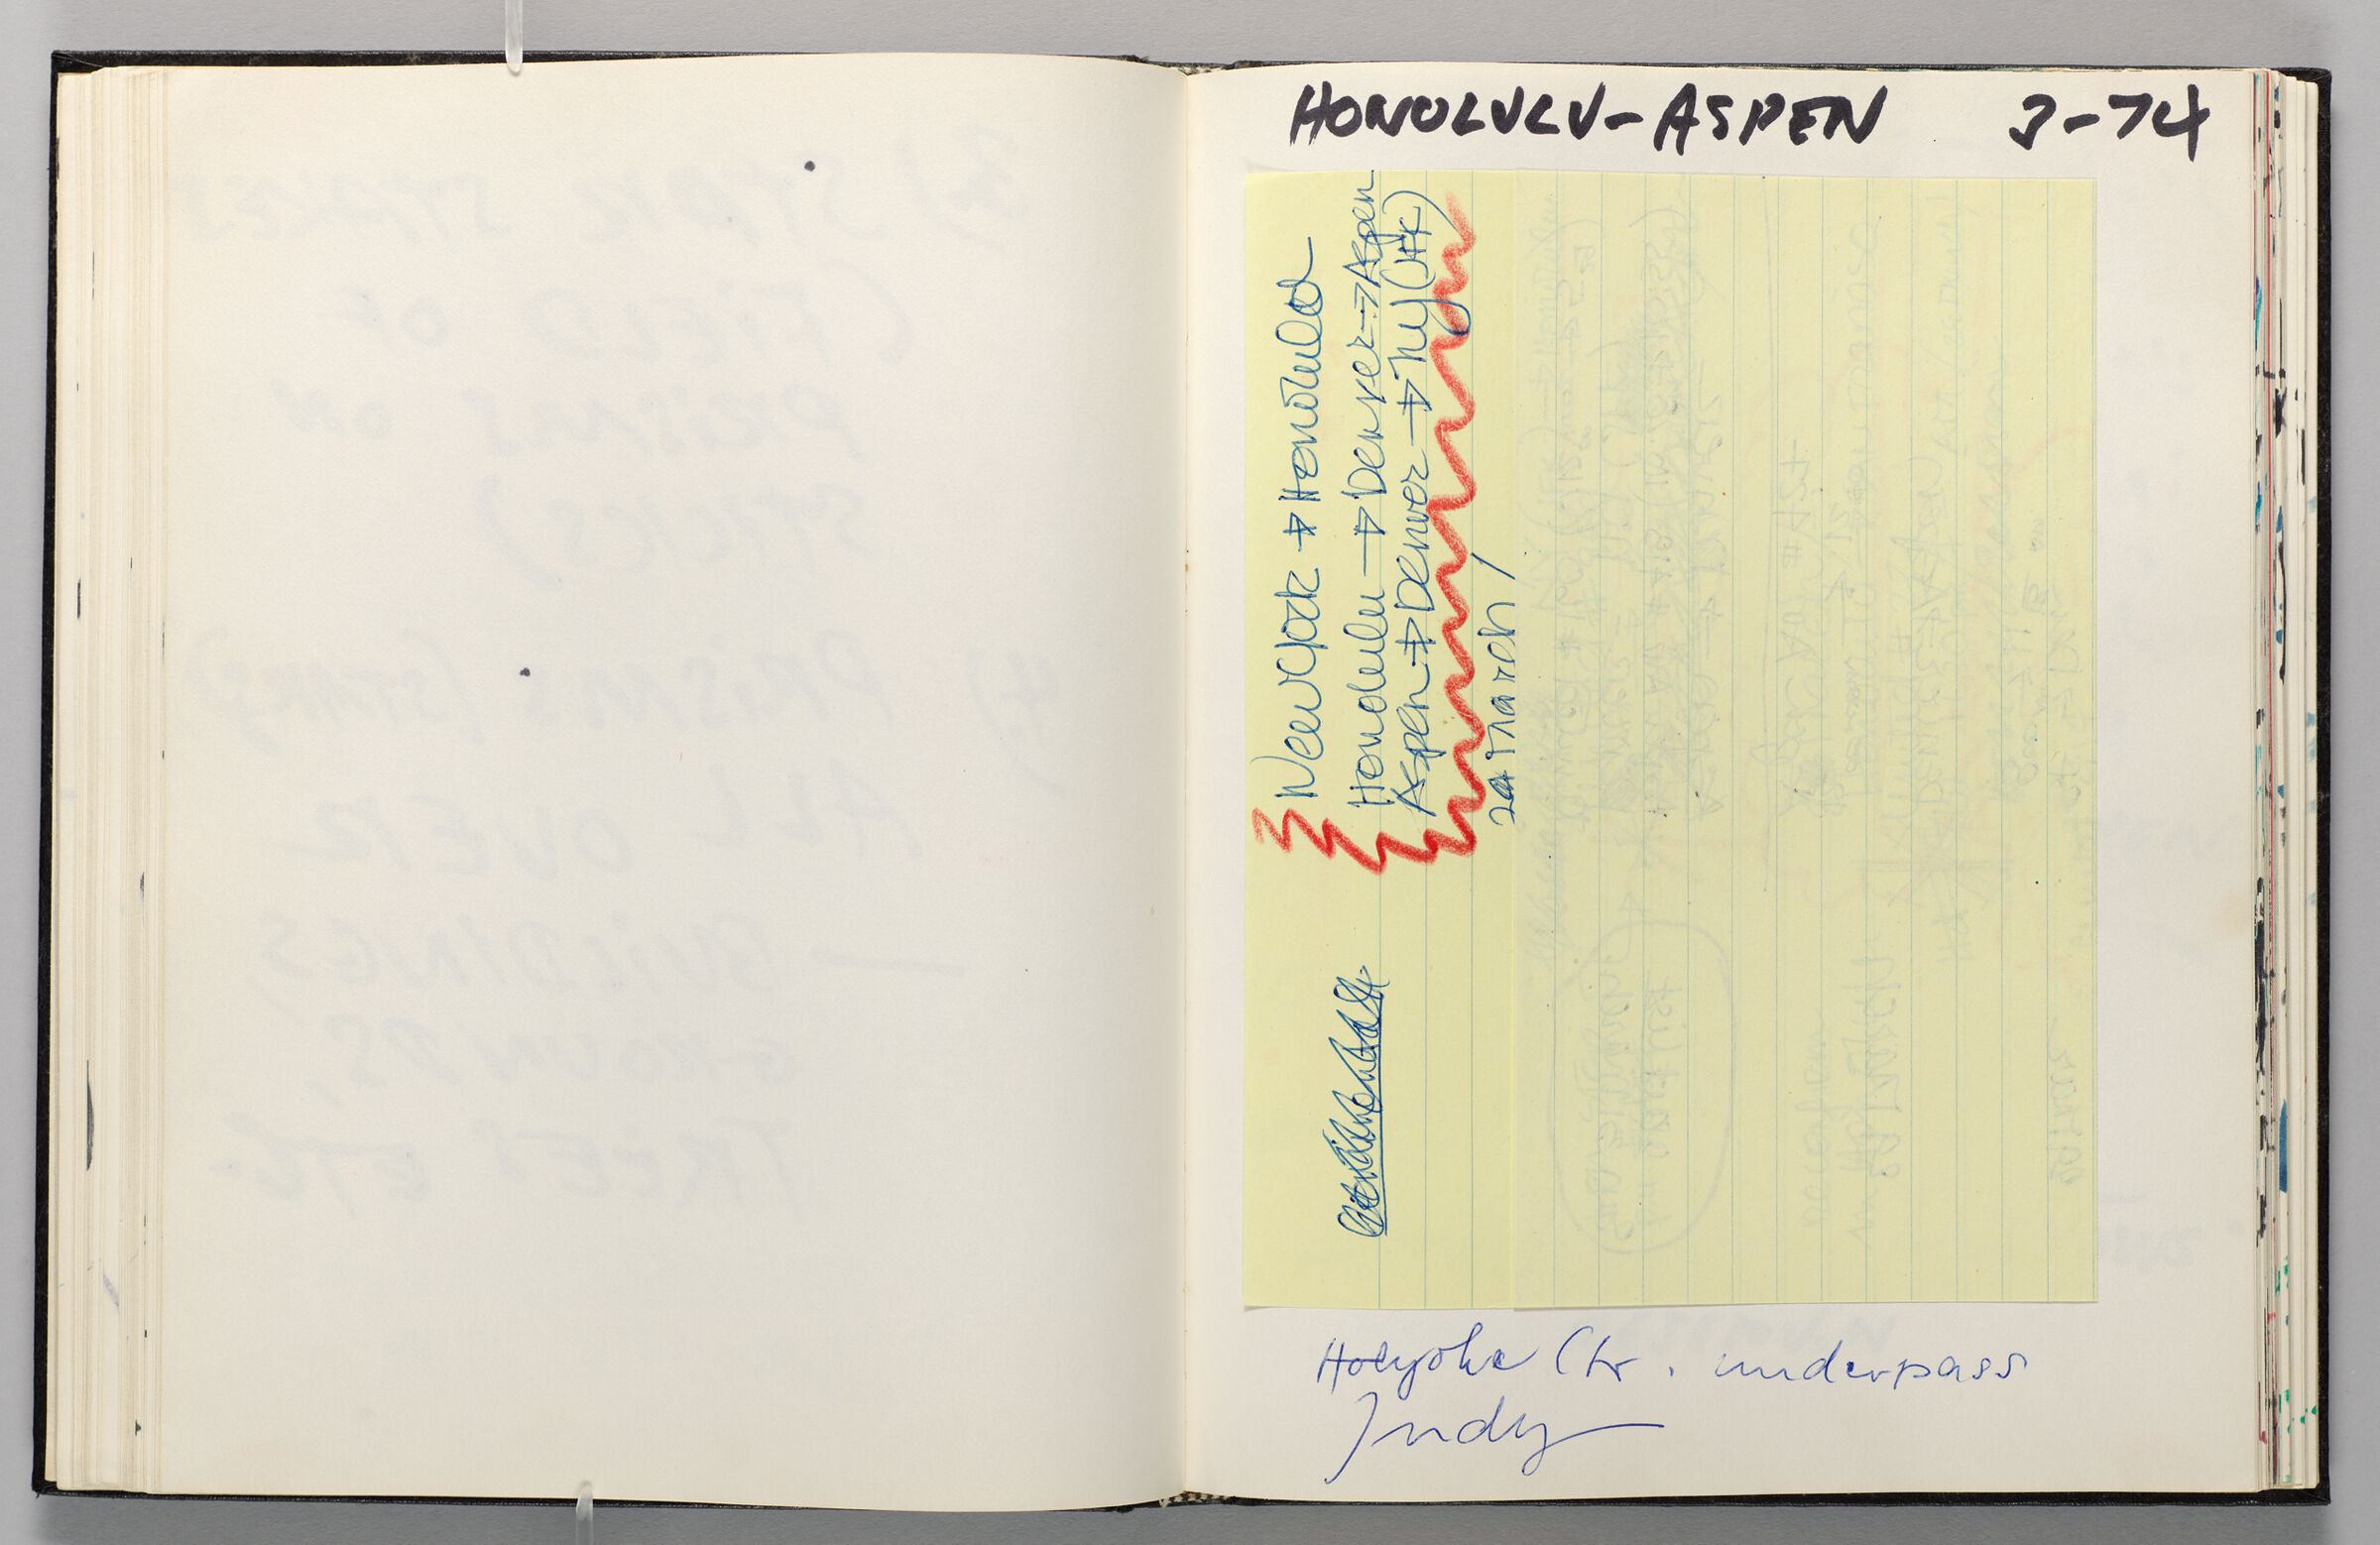 Untitled (Blank, Left Page); Untitled (Notes With Adhered Itinerary, Right Page)